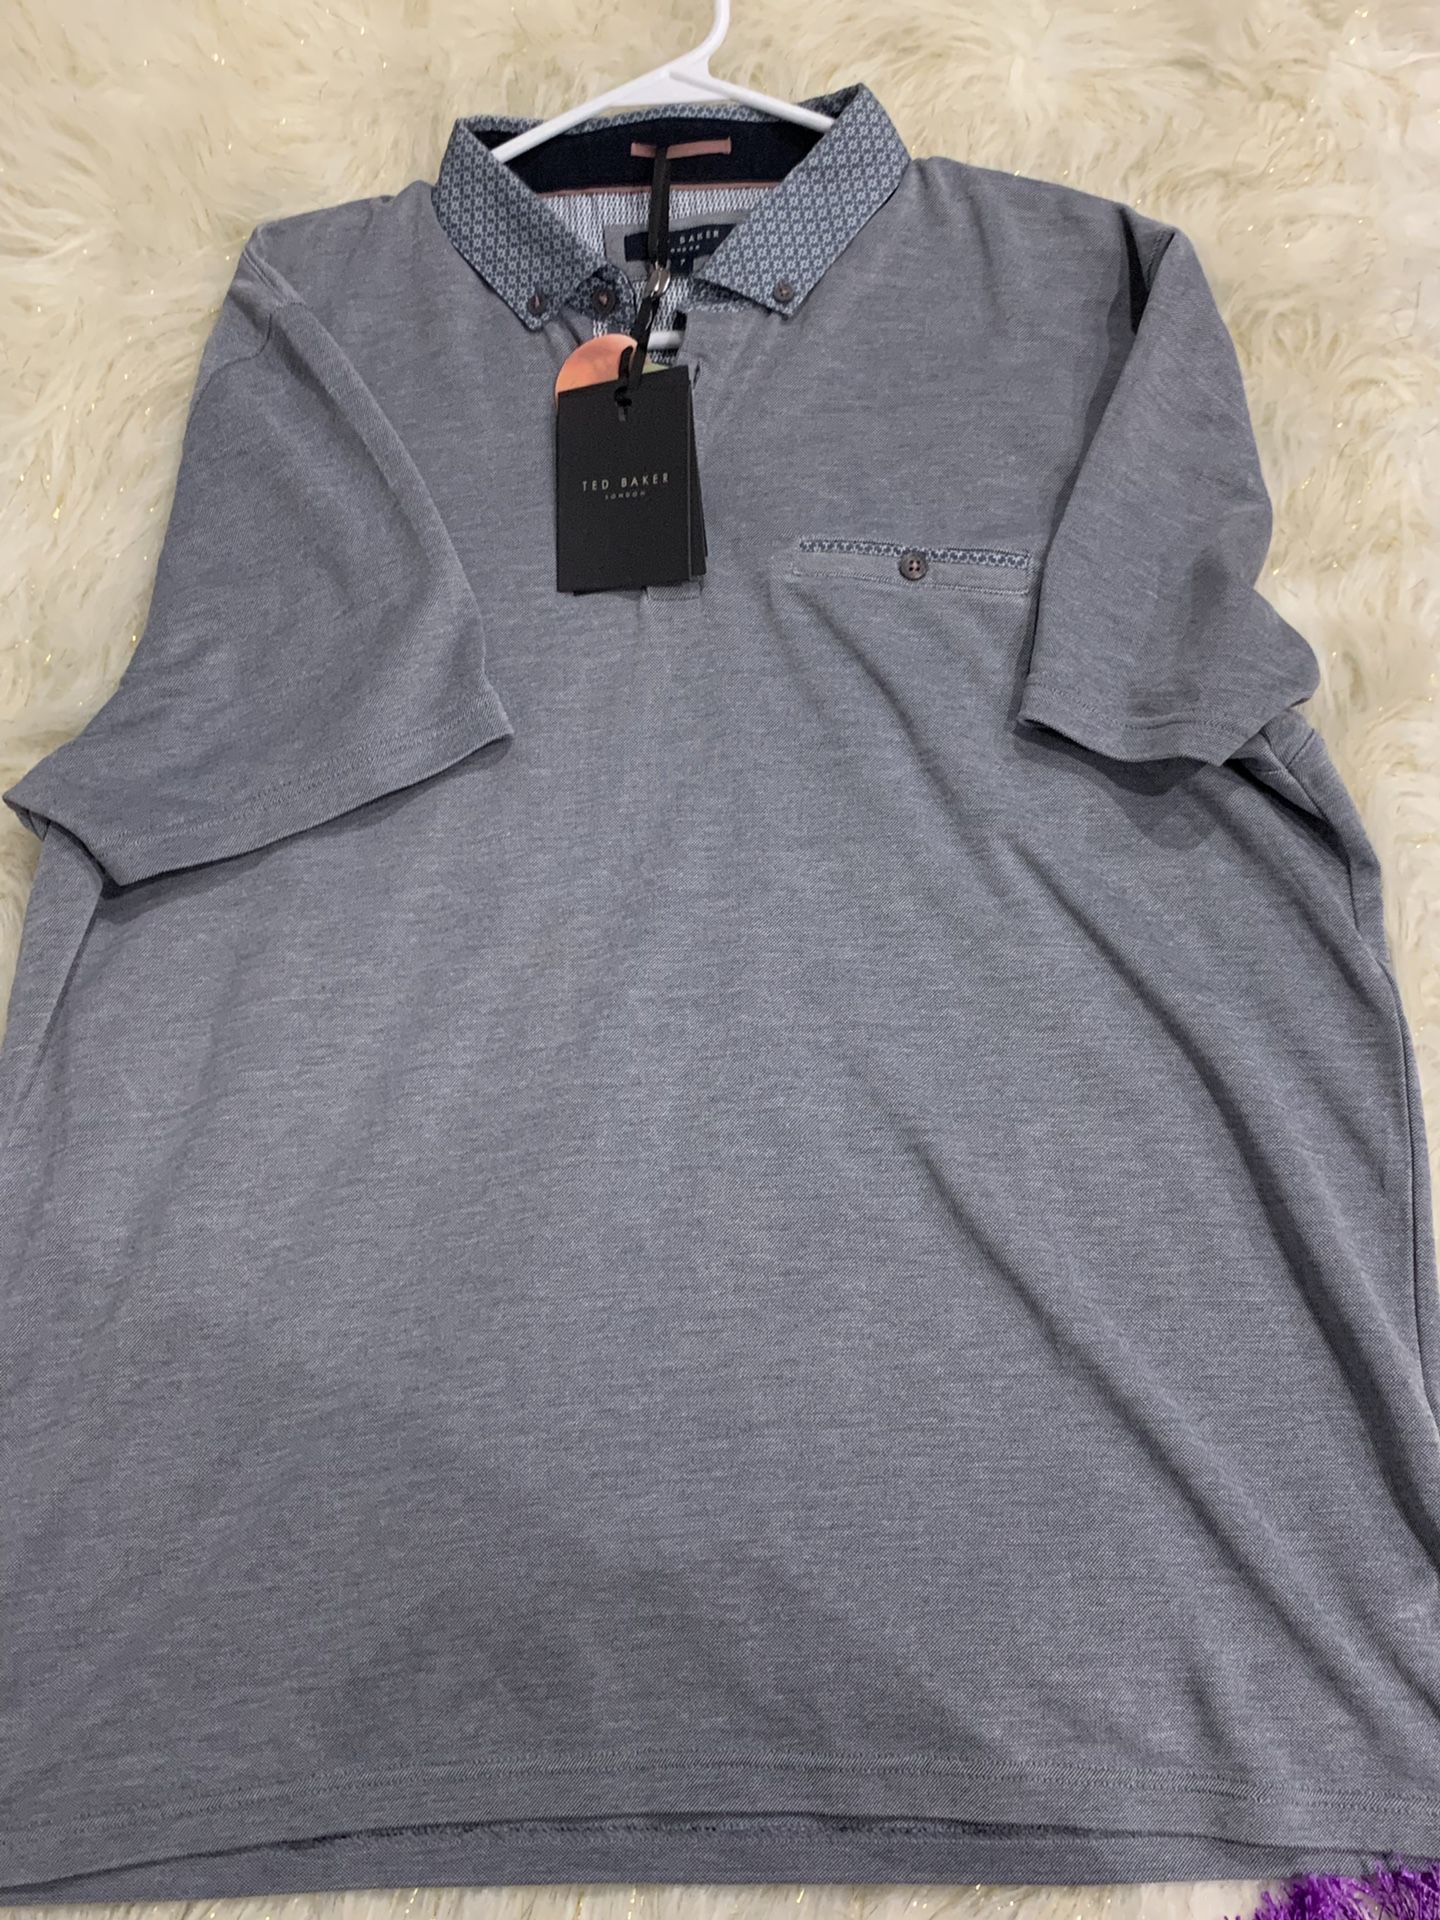 Brand New Ted Baker T-Shirt with Tag, size 7